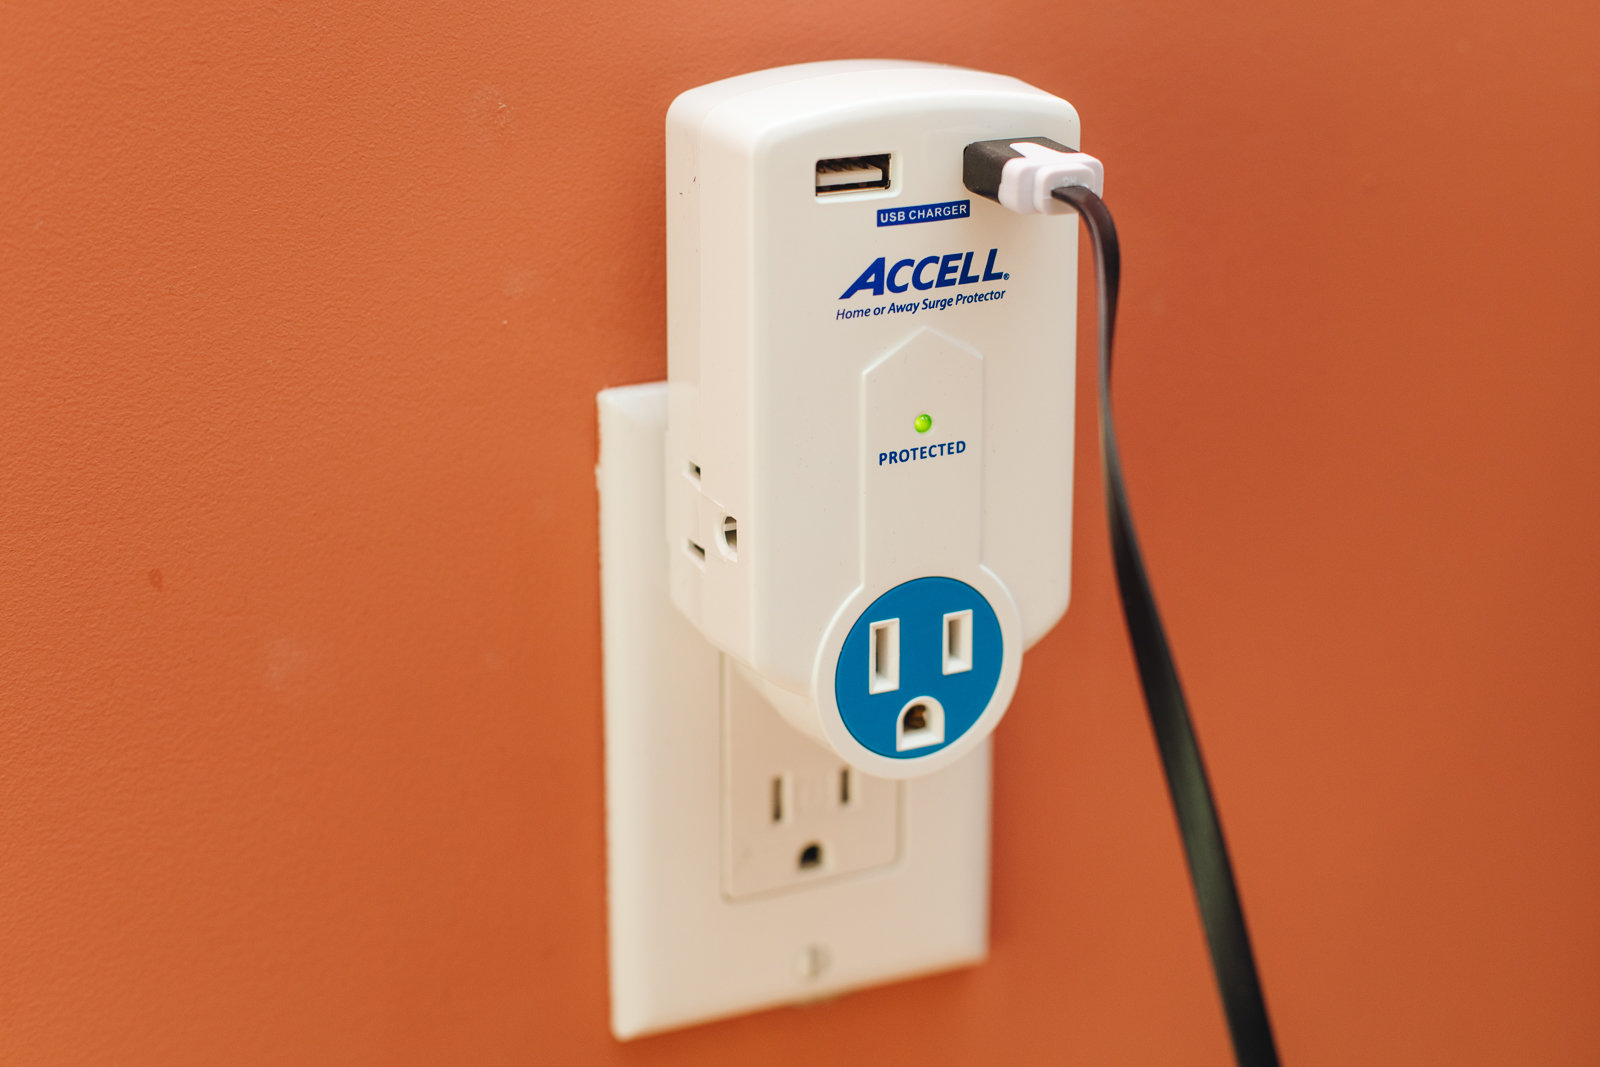 Portable power strips and surge protectors with USB charging